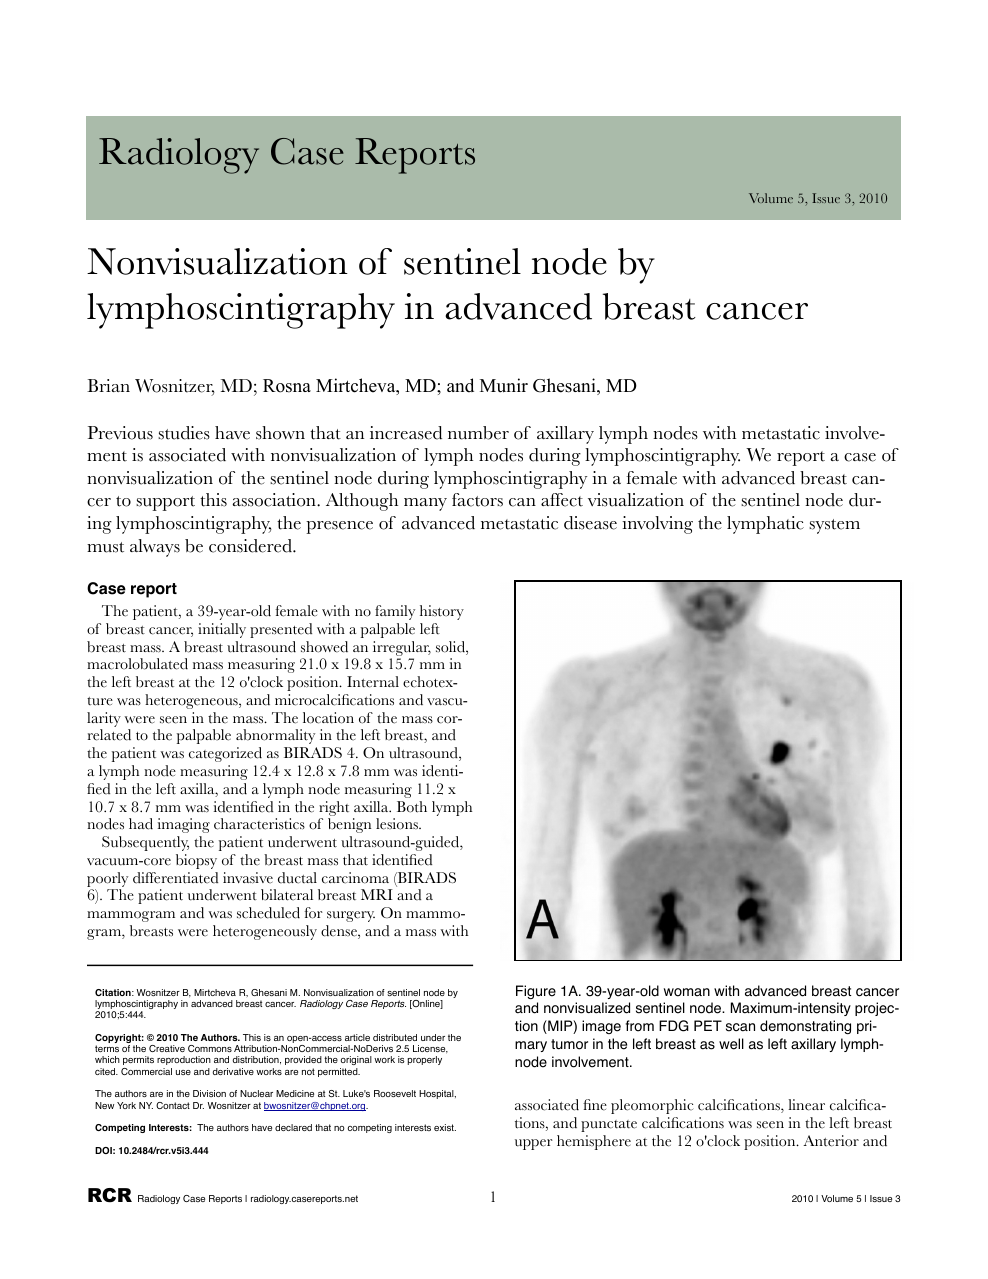 Nonvisualization Of Sentinel Node By Lymphoscintigraphy In Advanced Breast Cancer Topic Of Research Paper In Clinical Medicine Download Scholarly Article Pdf And Read For Free On Cyberleninka Open Science Hub